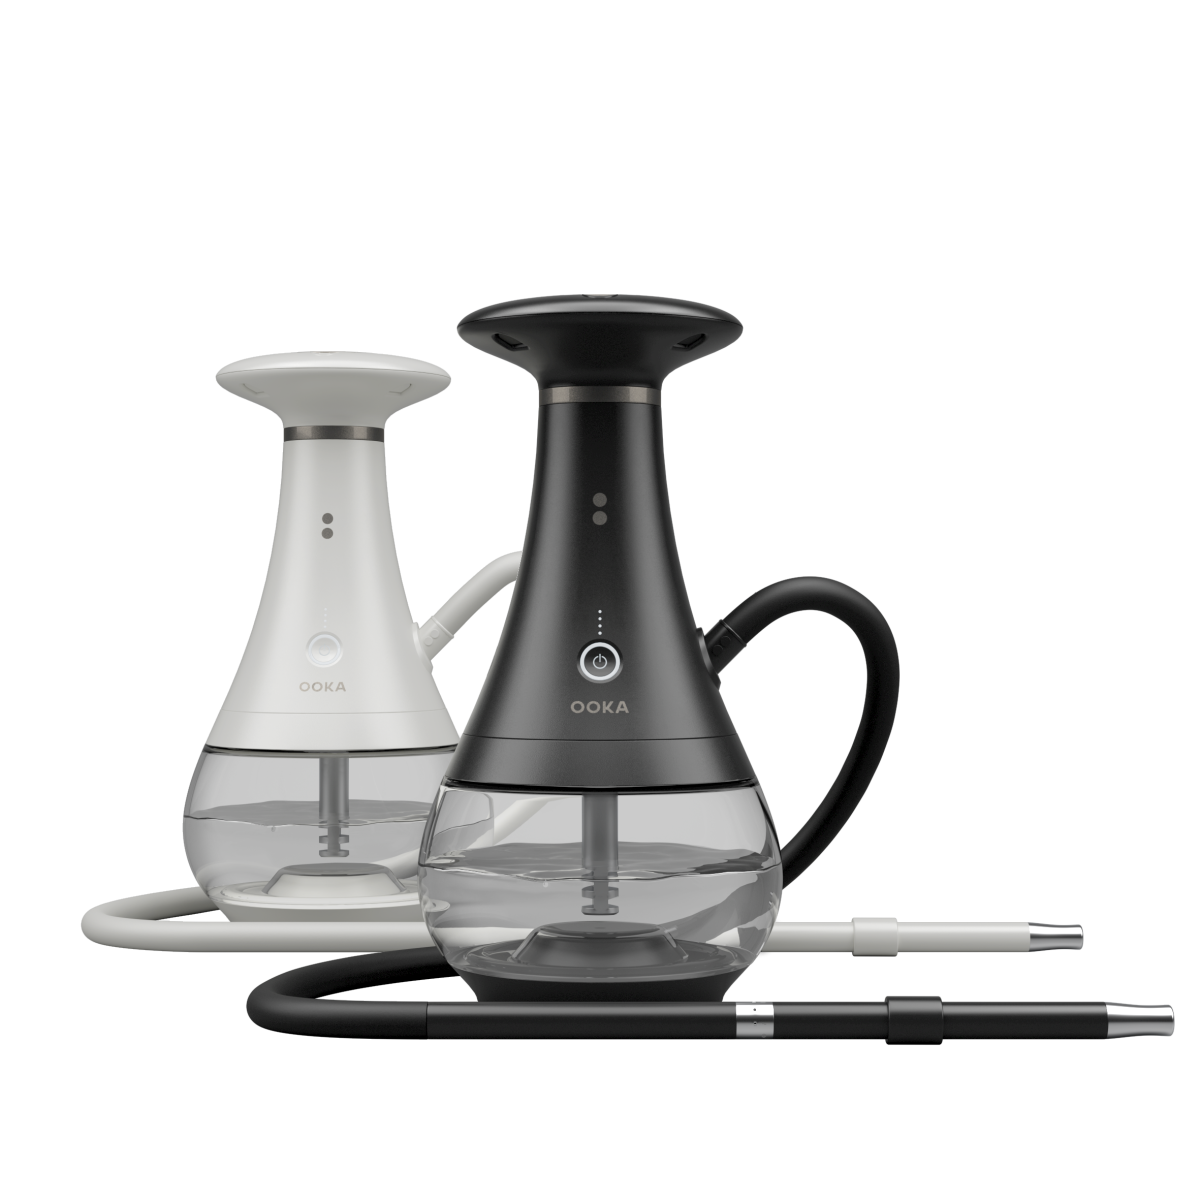 Two high-tech, water-filled, hookah-like vaporizers. One is white and one is black.